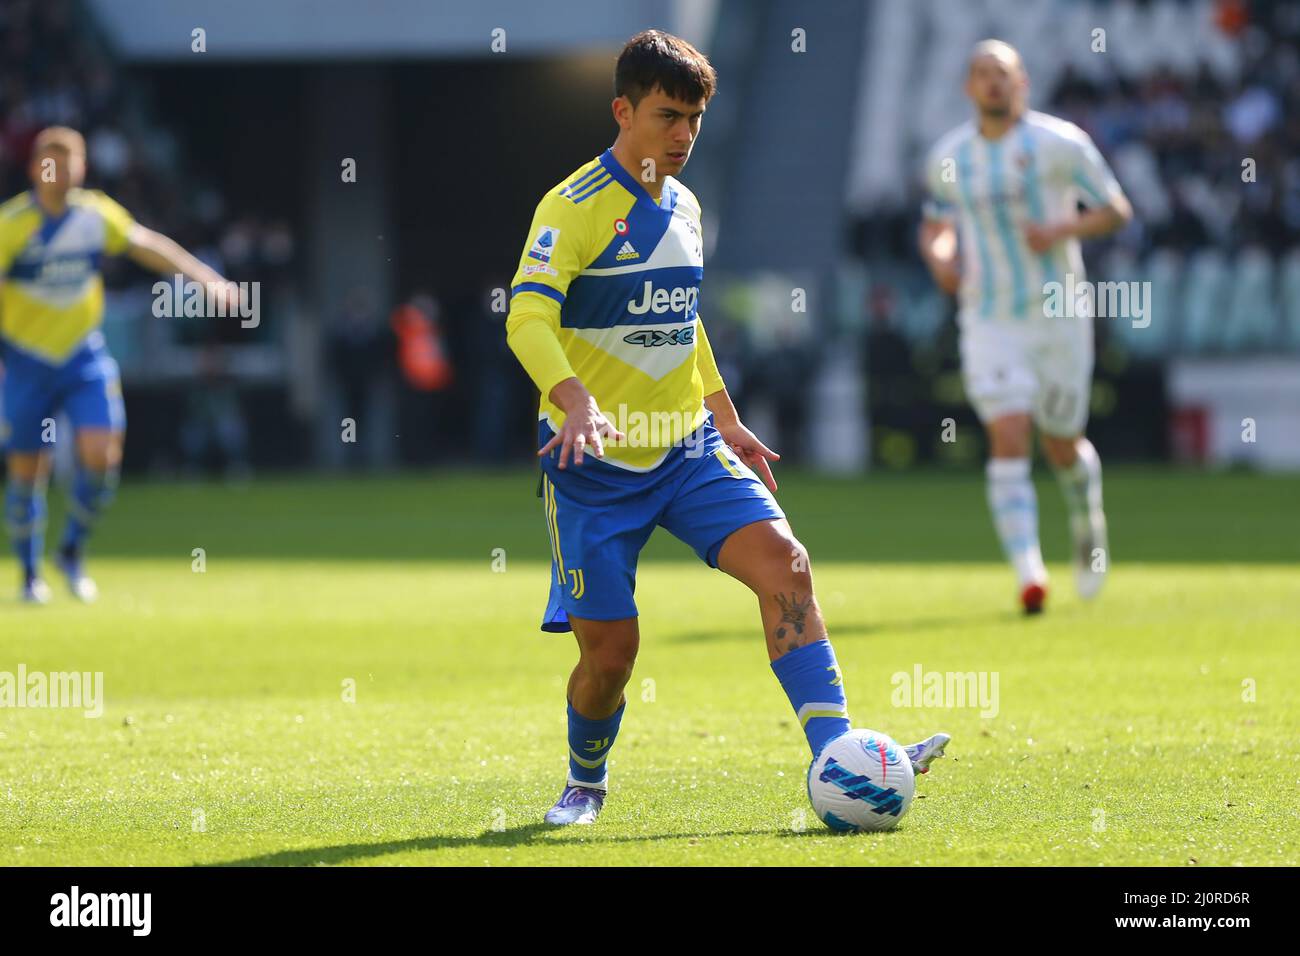 TURIN, ITALY. 20 MARCH 2022. Paulo Dybala of Juventus FC  during the match between Juventus FC and US Salernitana 1919 on March 20, 2022 at Allianz Stadium in Turin, Italy. Credit: Massimiliano Ferraro/Medialys Images/Alamy Live News Stock Photo